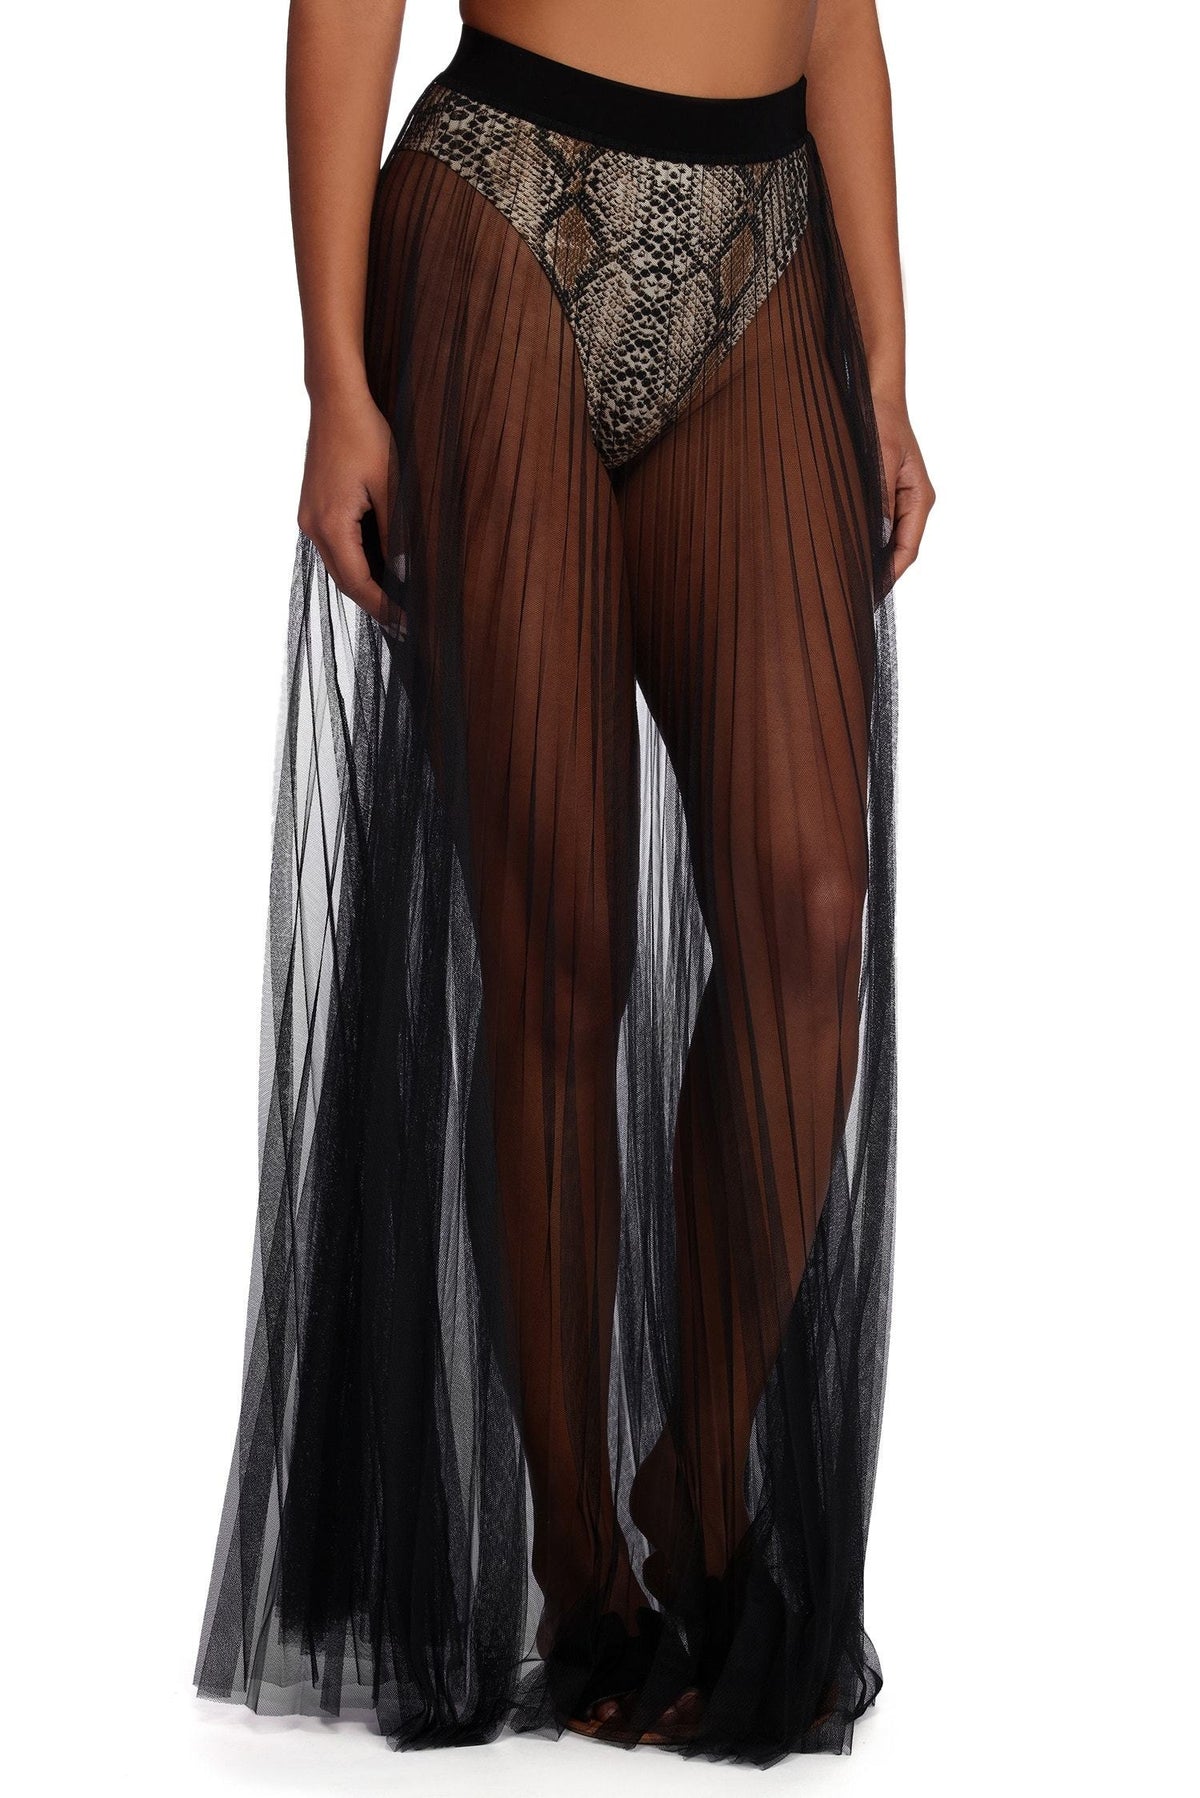 Mesmerizing In Mesh Maxi Skirt - Lady Occasions